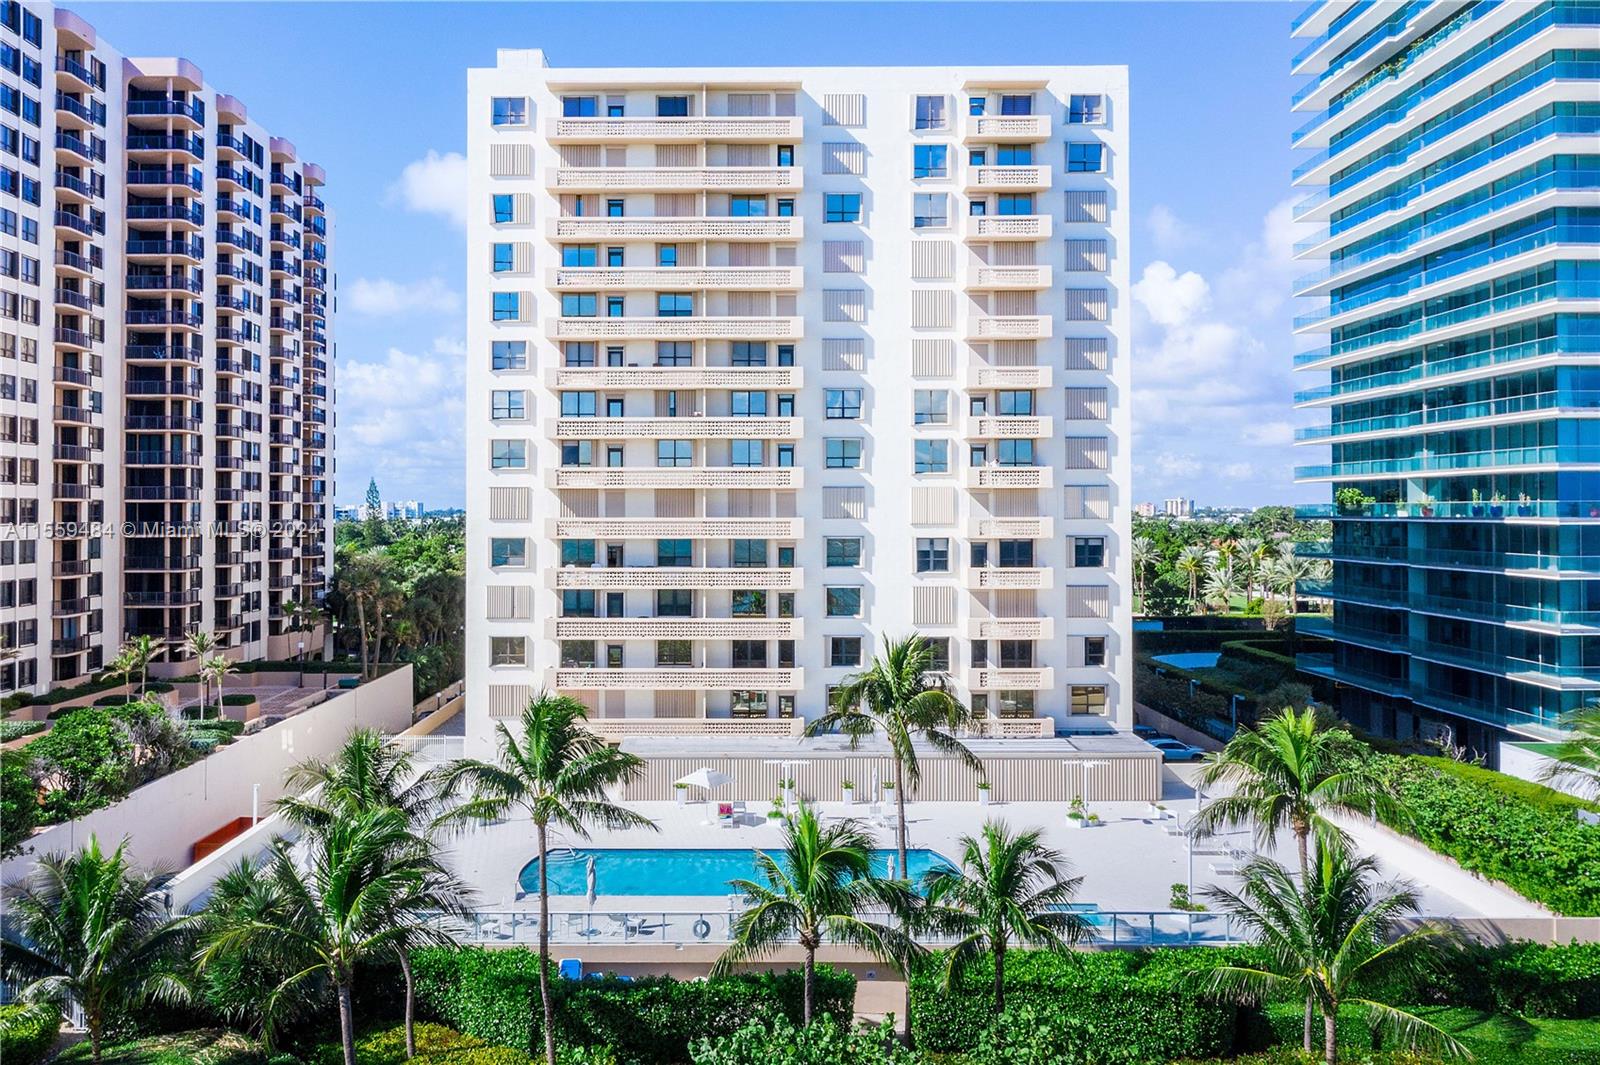 Amazing opportunity on Bal Harbour Beach to Own A 1346 SQ.FT. 2 Bedroom 2 Bath with split floor plan. This home features a New A/C system updated Kitchen, Bathrooms, and Marble Flooring throughout. The Plaza is a Full-Service Building Featuring 24-hour Security/Concierge, Valet Parking, Social / Party Room, Gym, Pool, Jacuzzi, private Beach Service. This Fantastic Location offers world-Renowned Bal Harbour Shops, Surfside Shopping District within walking distance, and one of the Best Public K-8 School in Dade County. Hurry to make this Bal Harbour Gem Your Own.